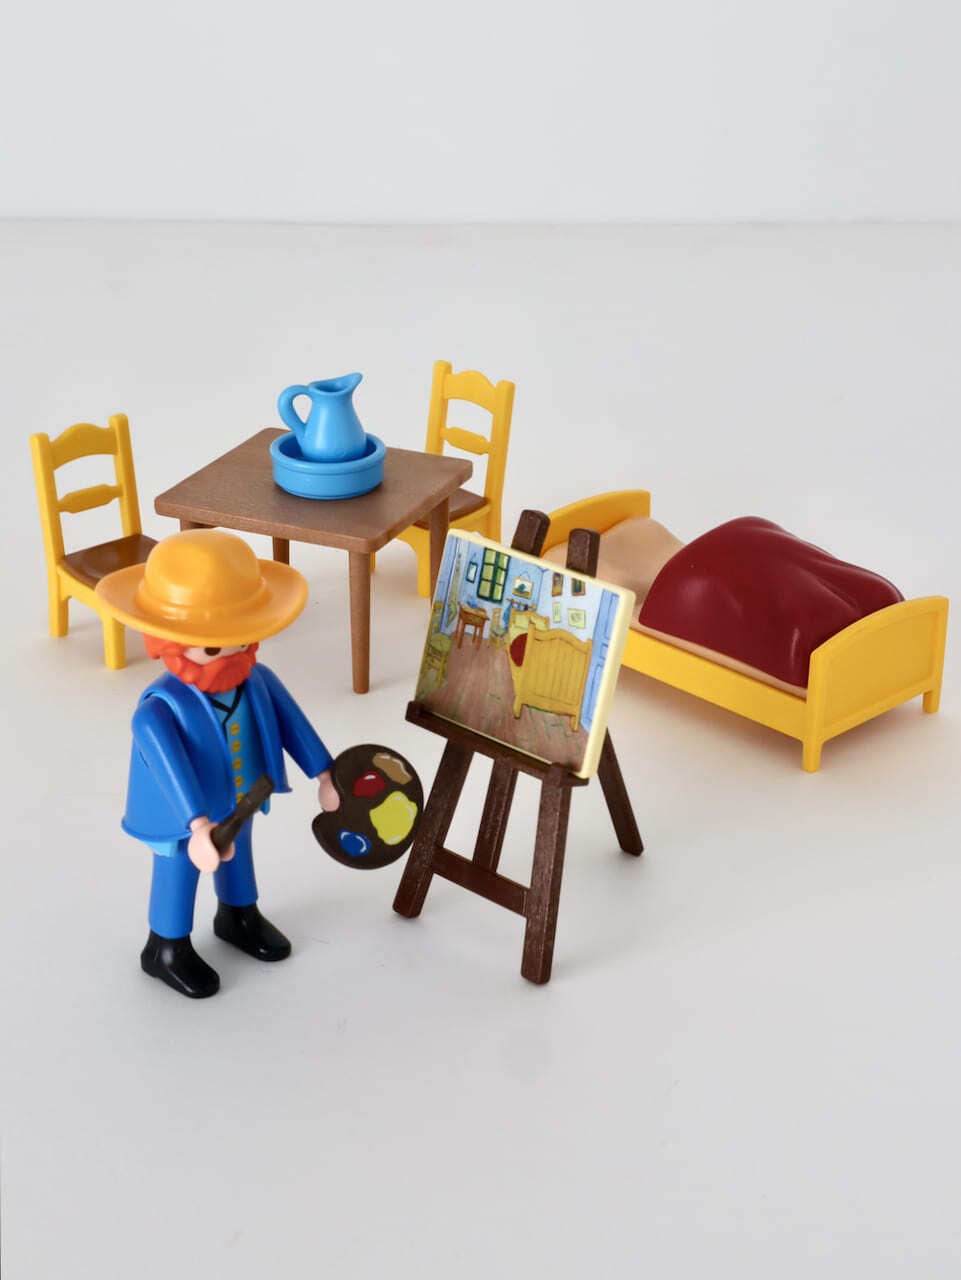 Van Gogh and The Bedroom as a Playmobil 70687 set